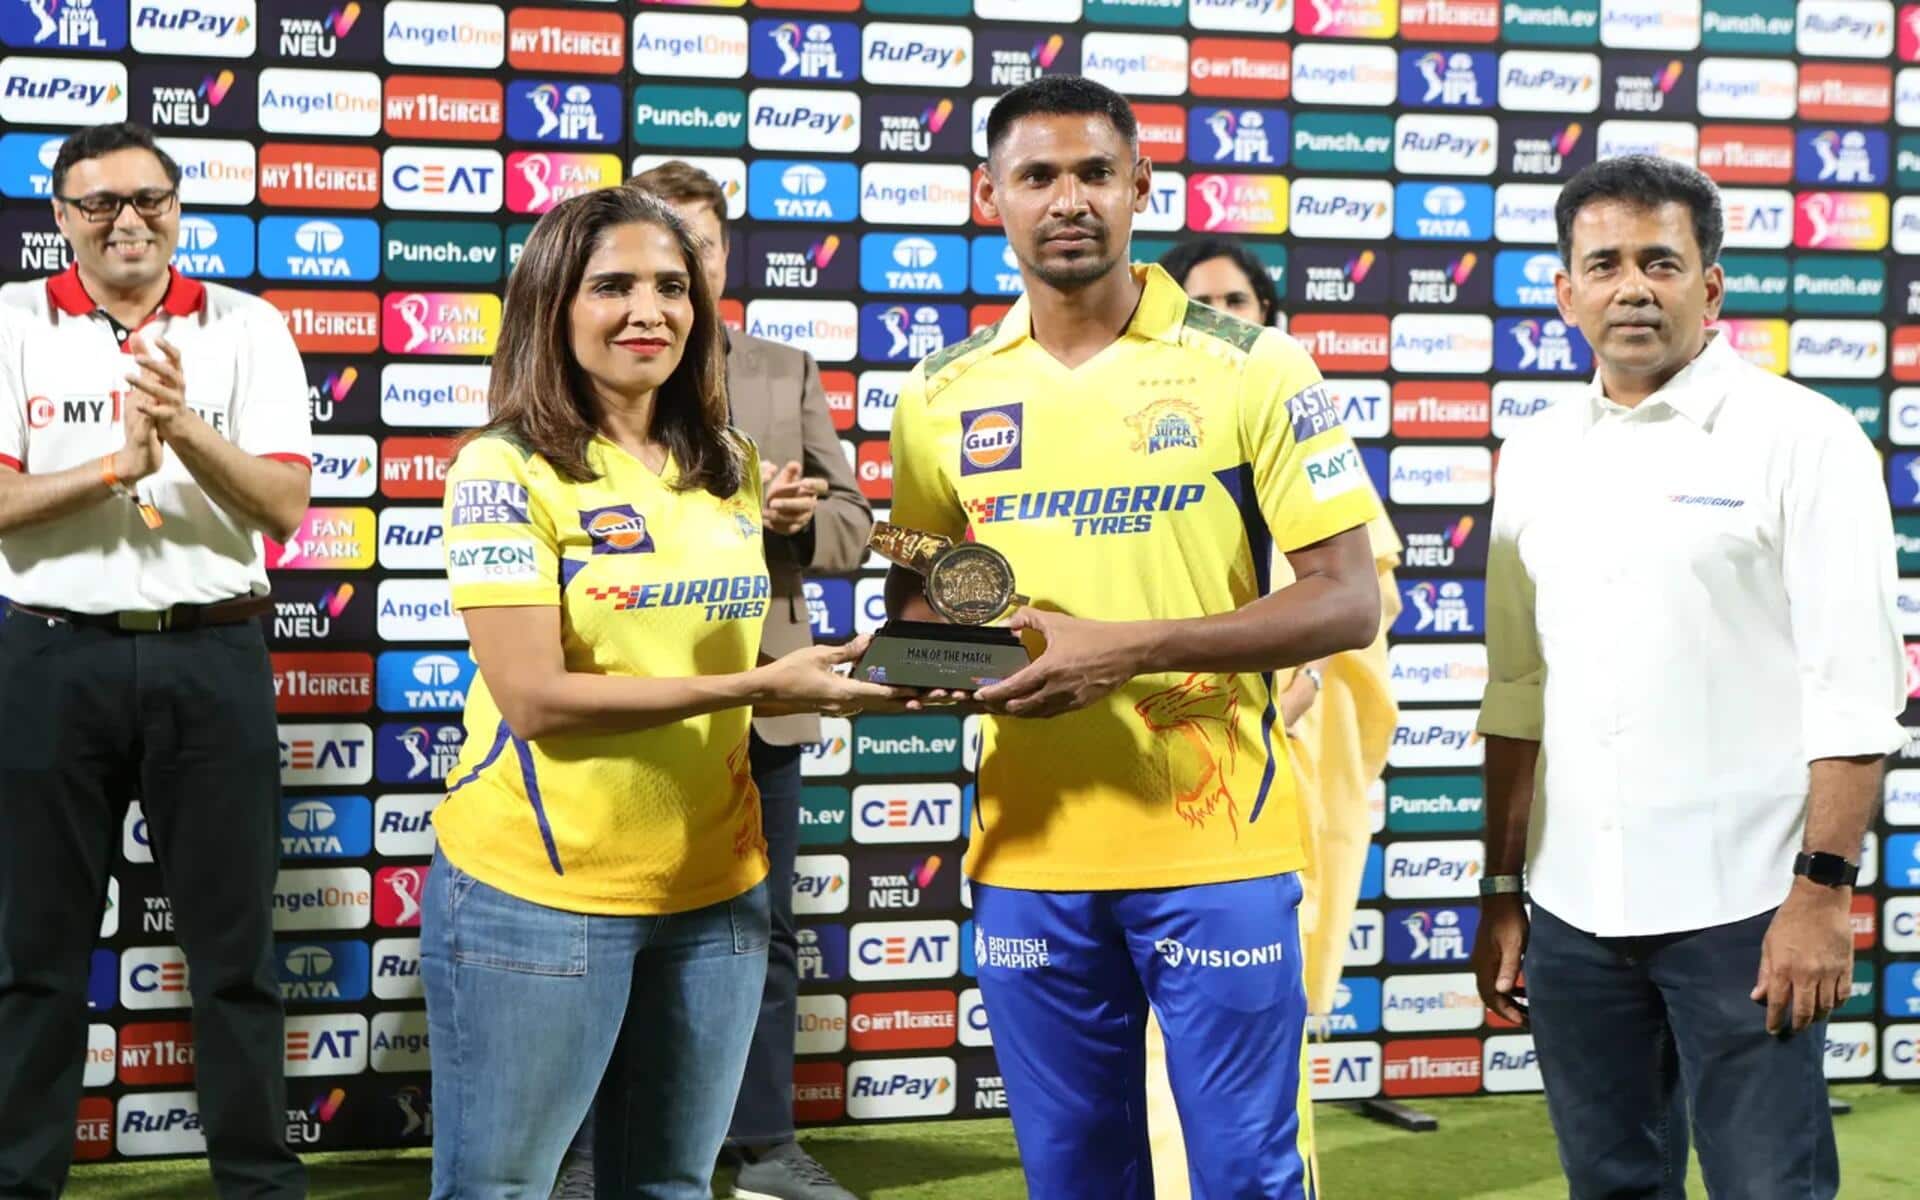 Mustafizur Rahman was picked as the player of the match (Source: IPL)